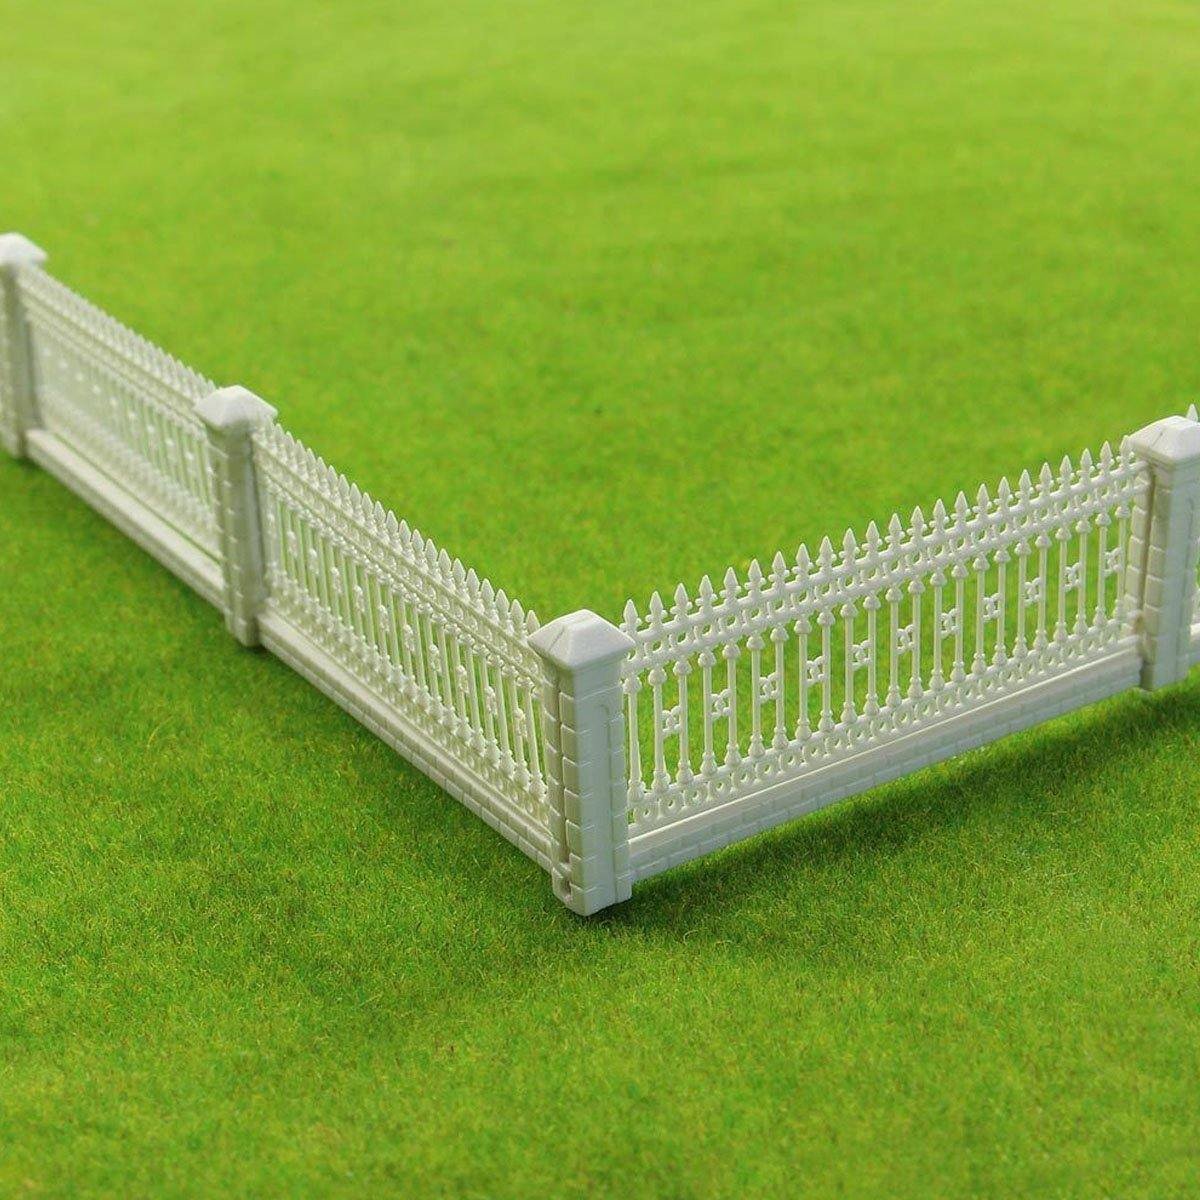 Olive Drab 1:87 HO Scale Detechable Fences For Sand Table Model Building Train Railway